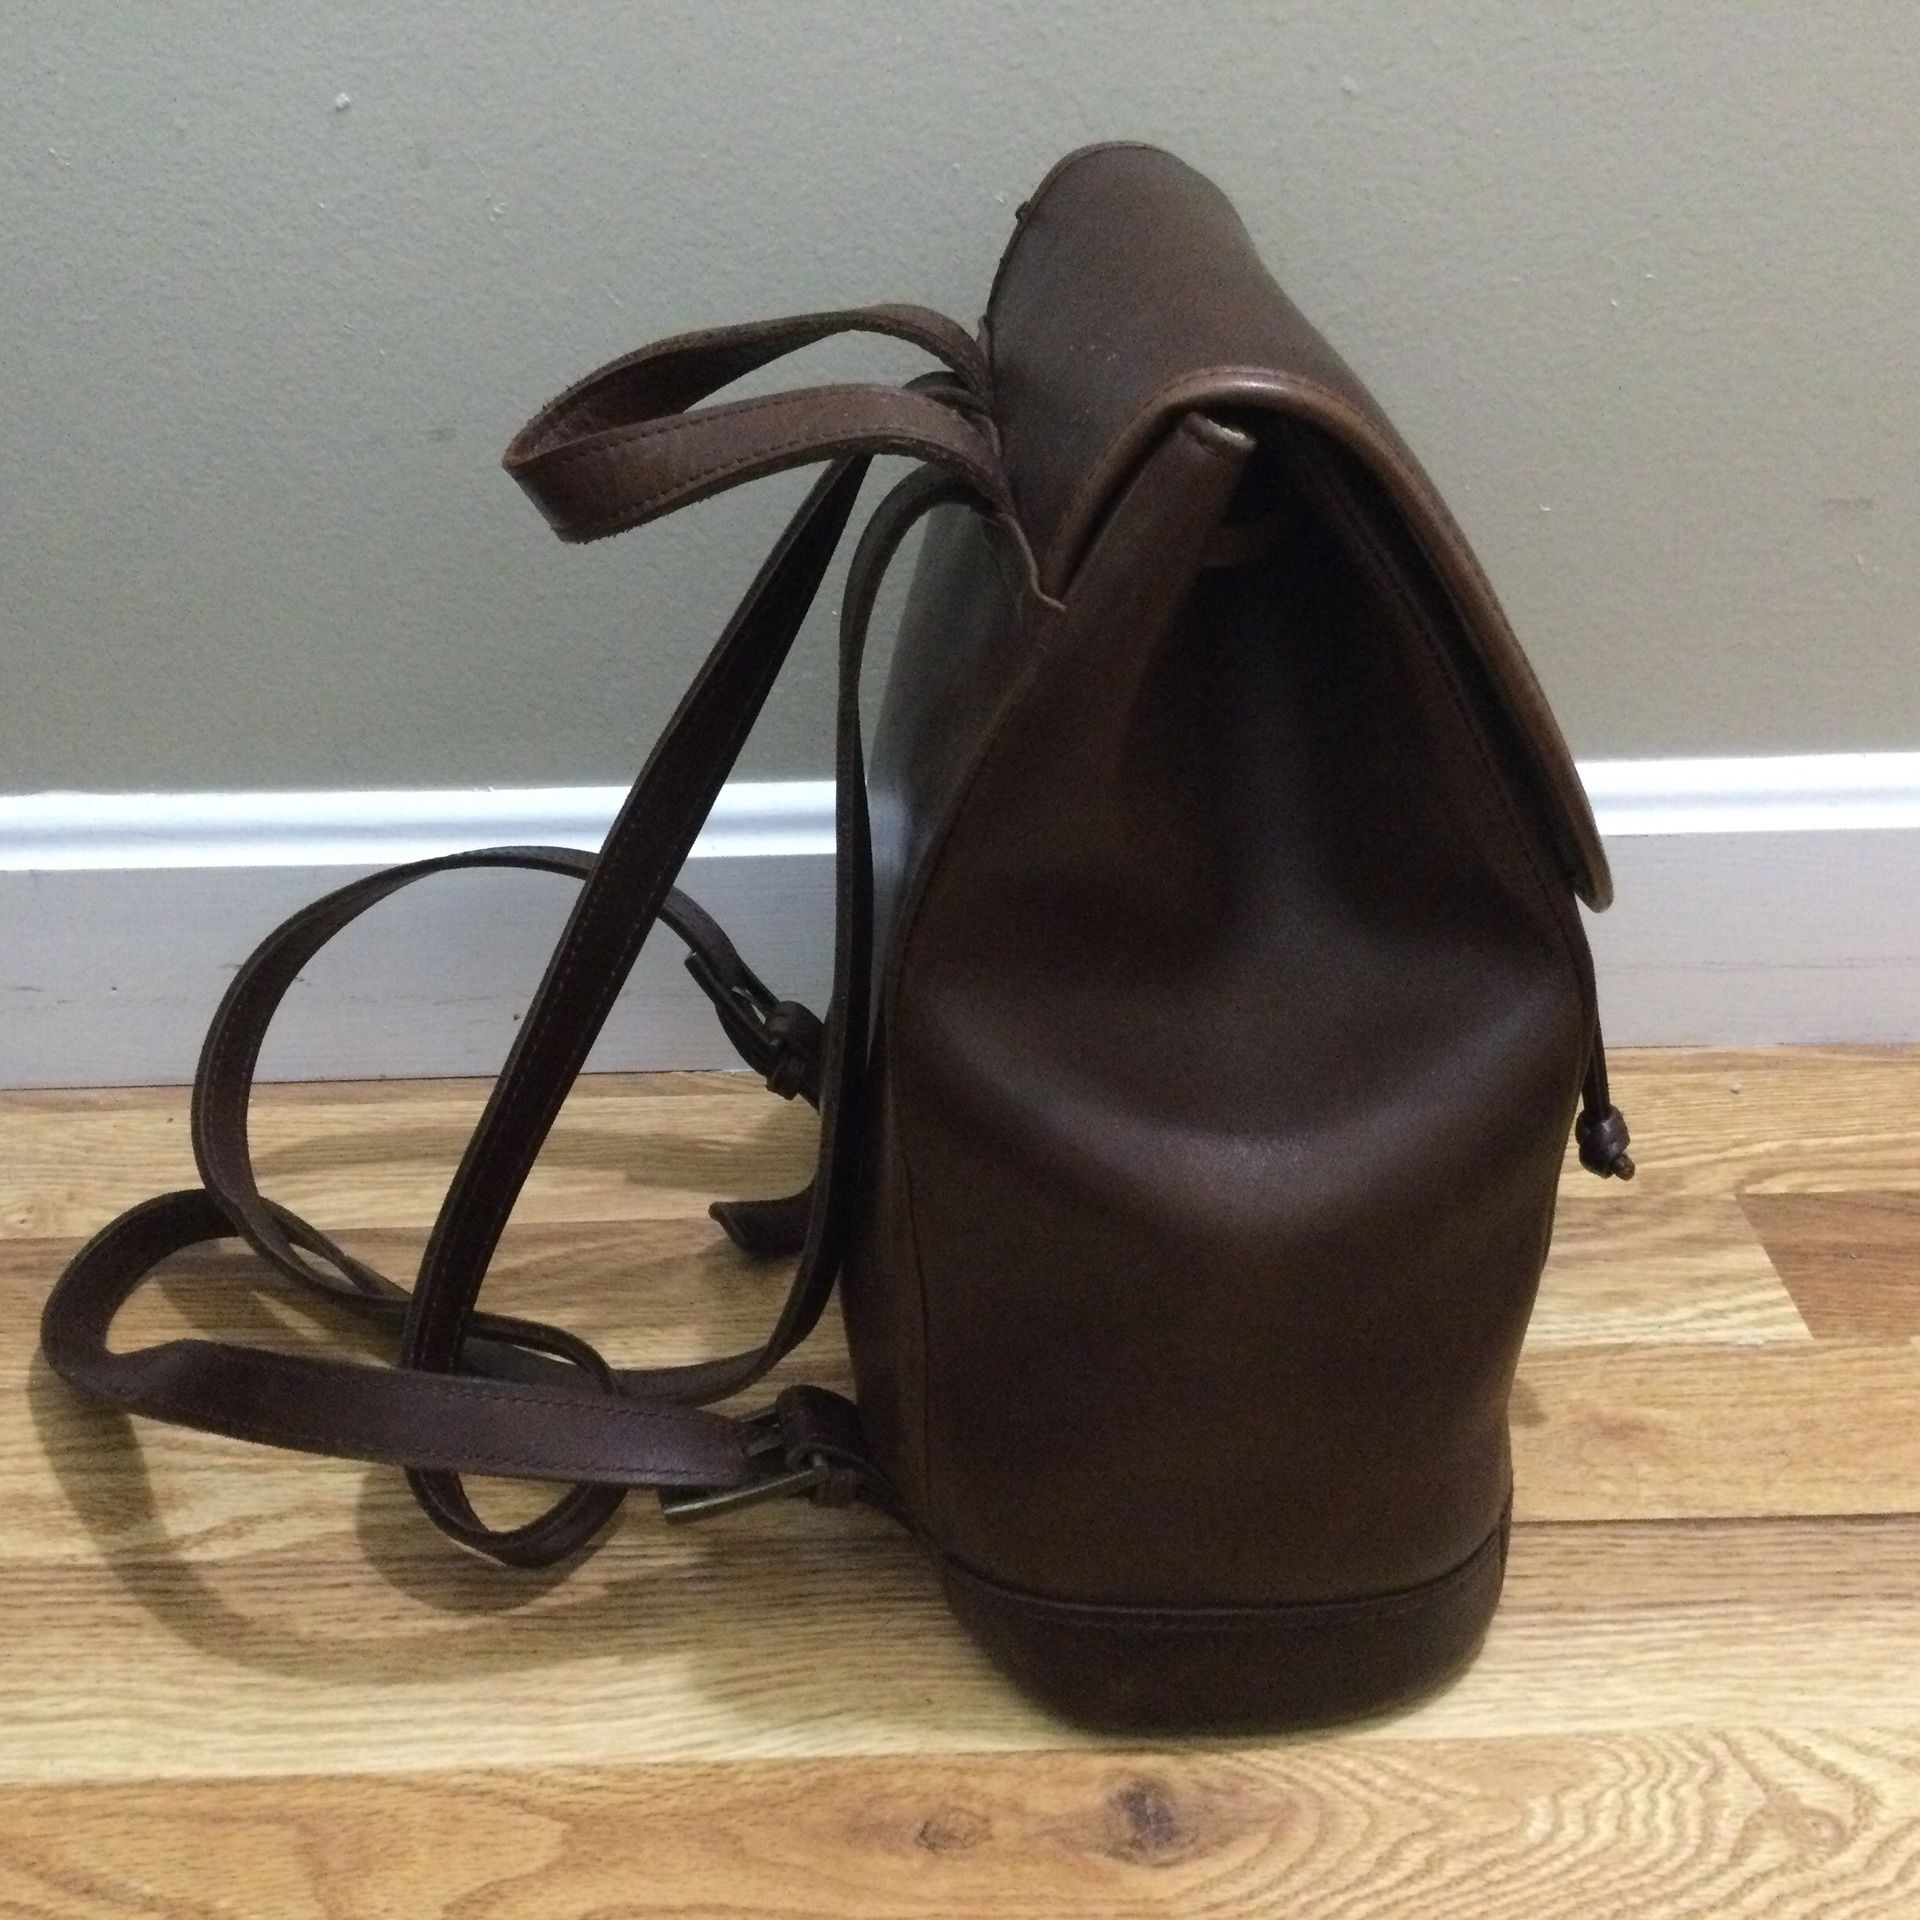 L.L. Bean Brown Leather Backpack 